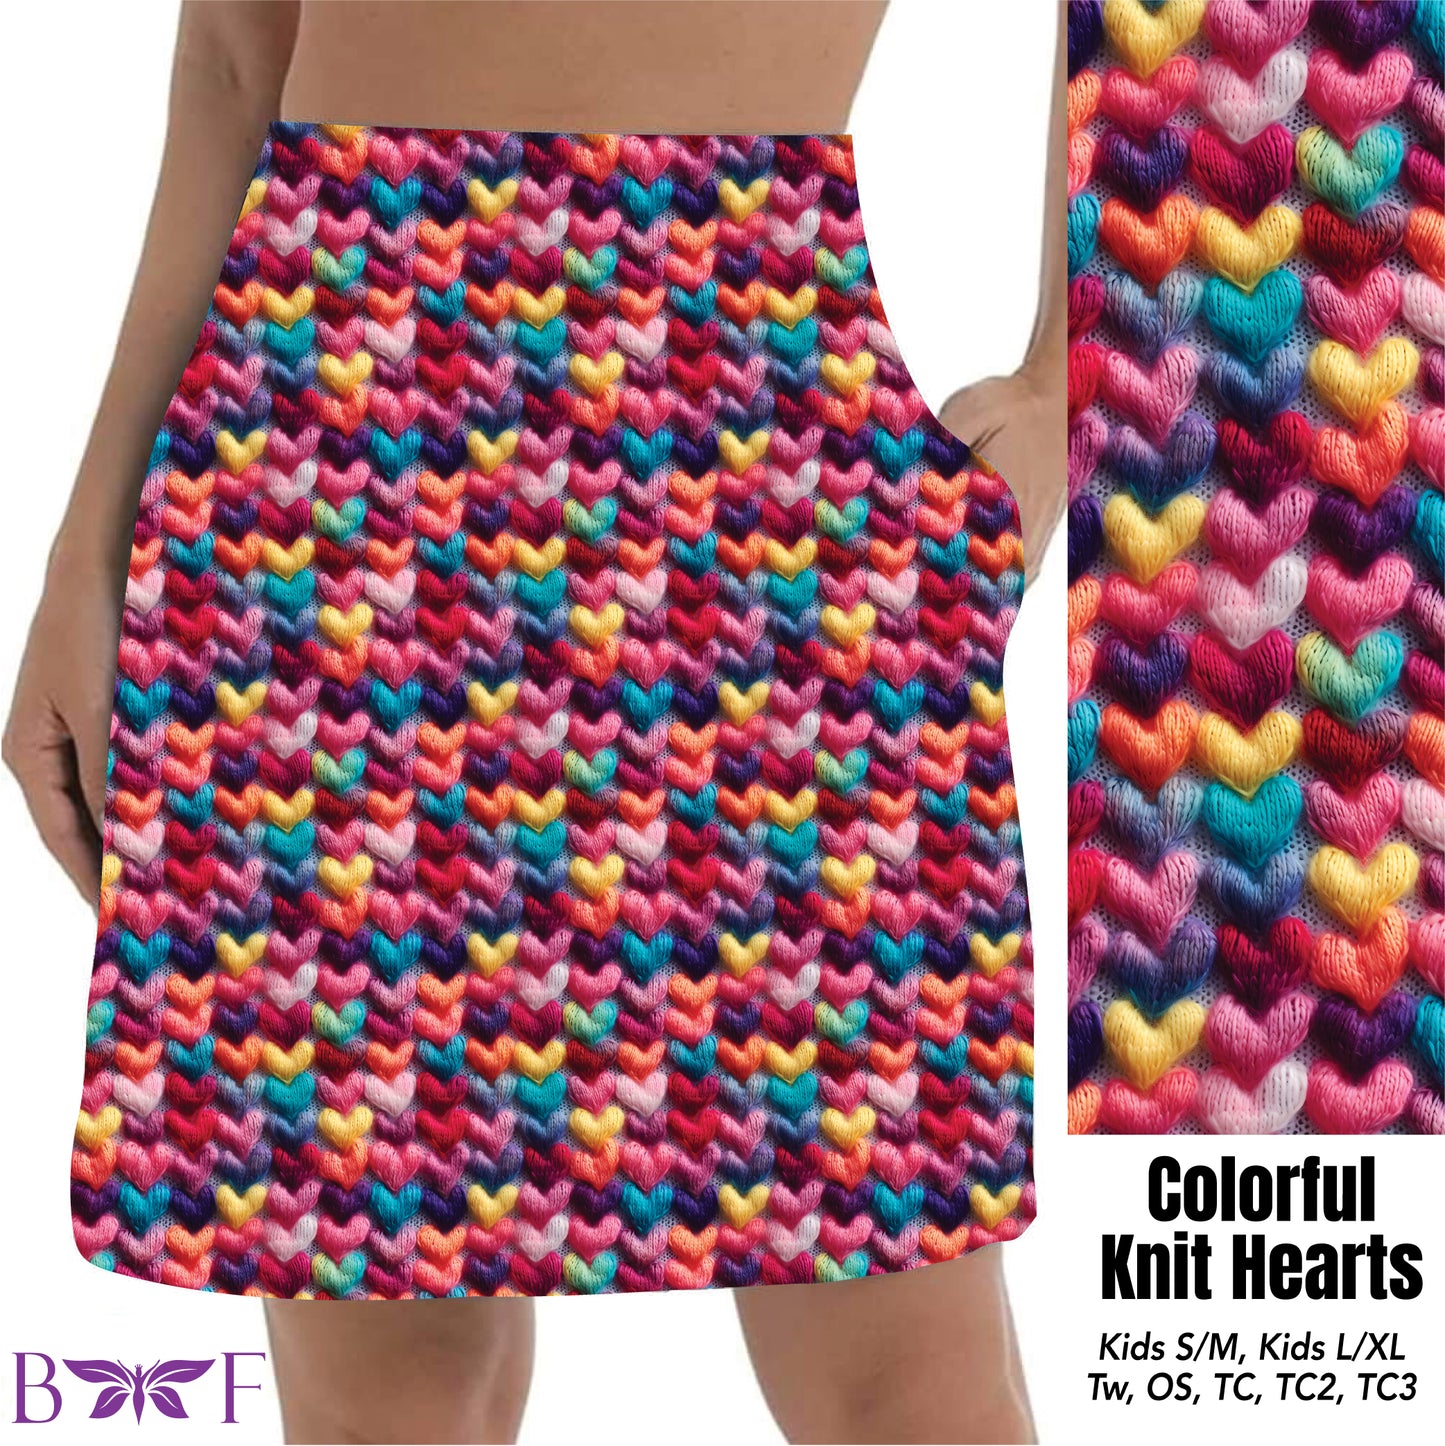 Colorful knit hearts leggings with pockets